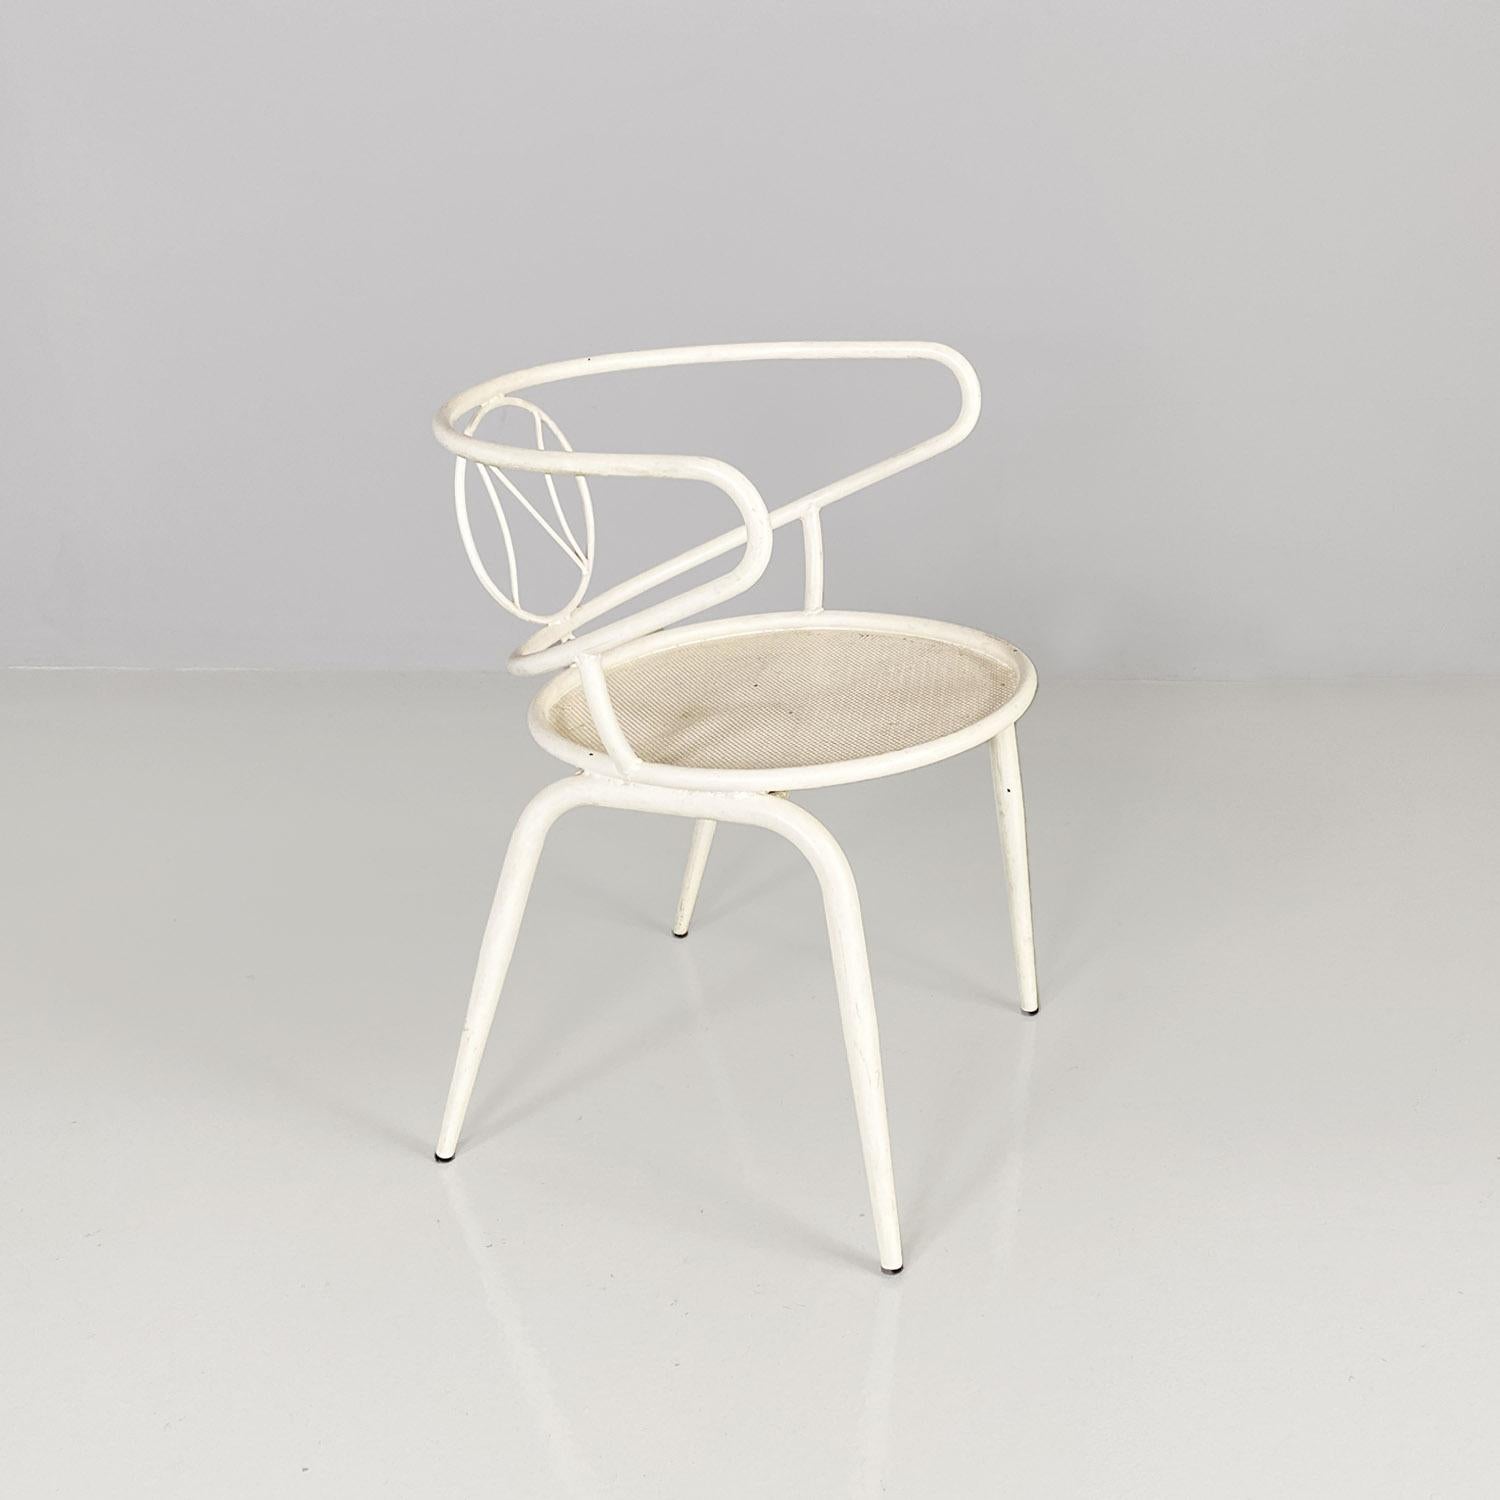 Italian mid century white metal outdoor chair with armrests, 1950s.
Outdoor chair with white enamelled metal structure, with armrests and micro-perforated seat, with an 